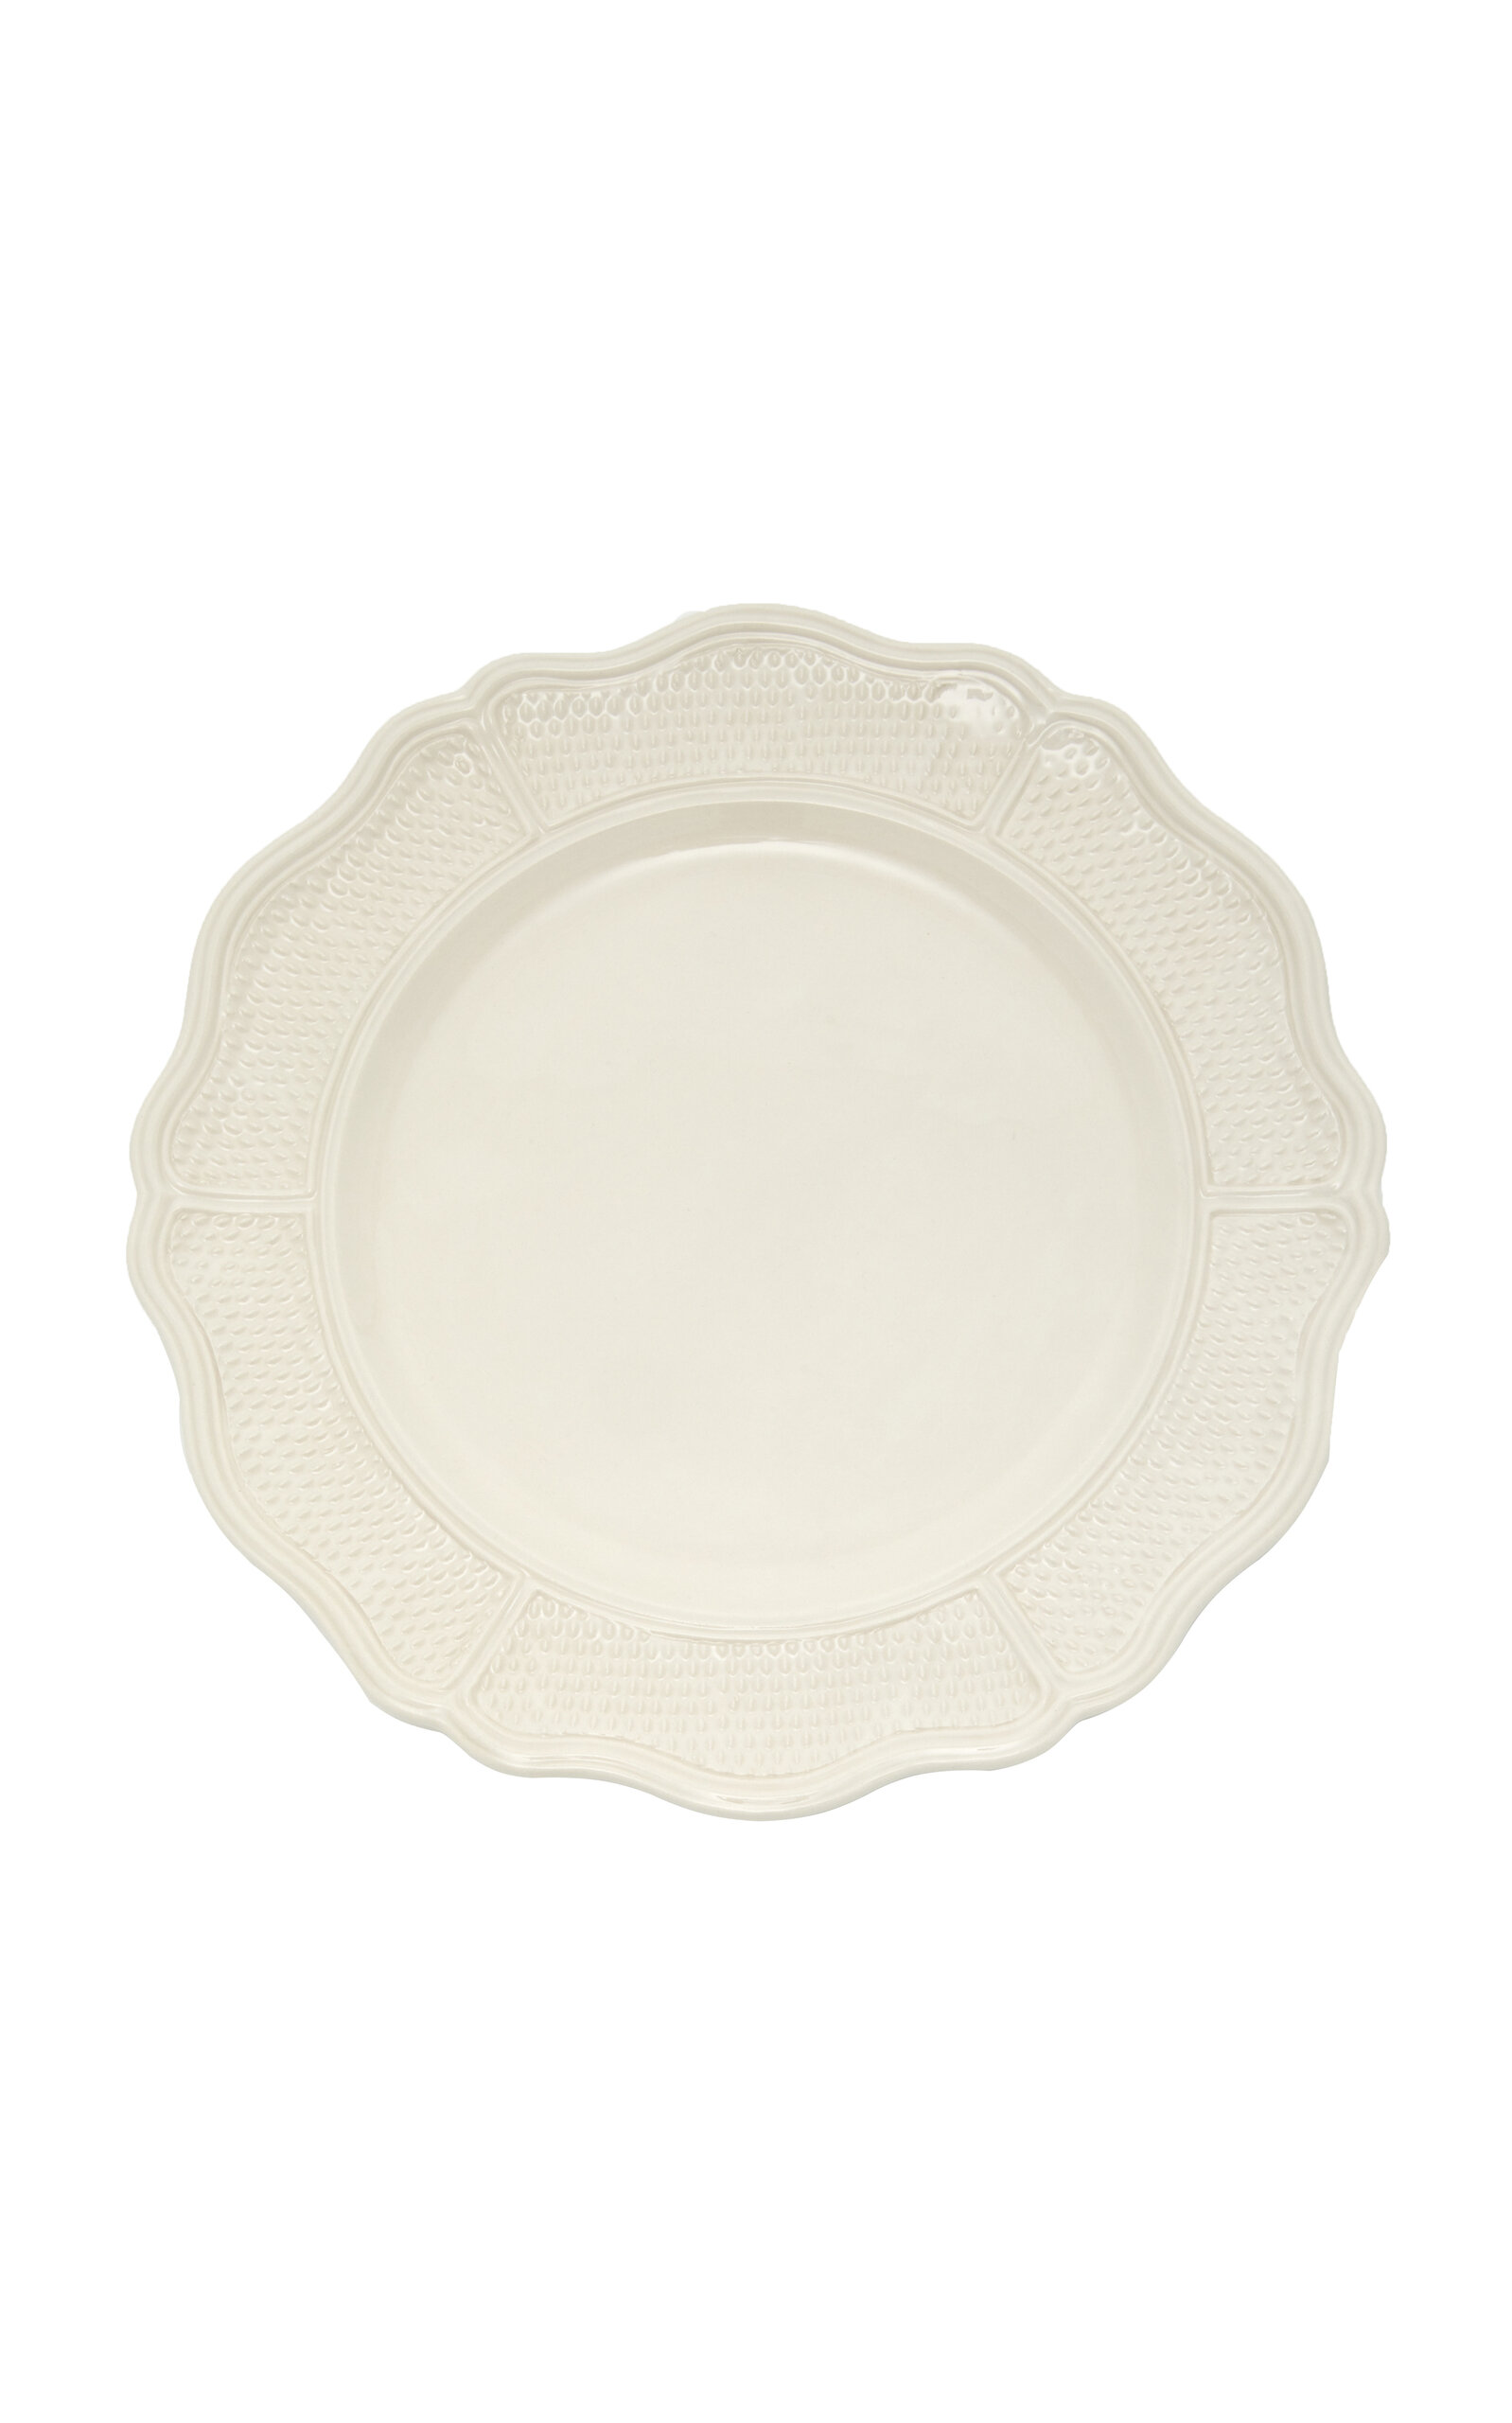 Moda Domus Doots Creamware Charger Plate In White